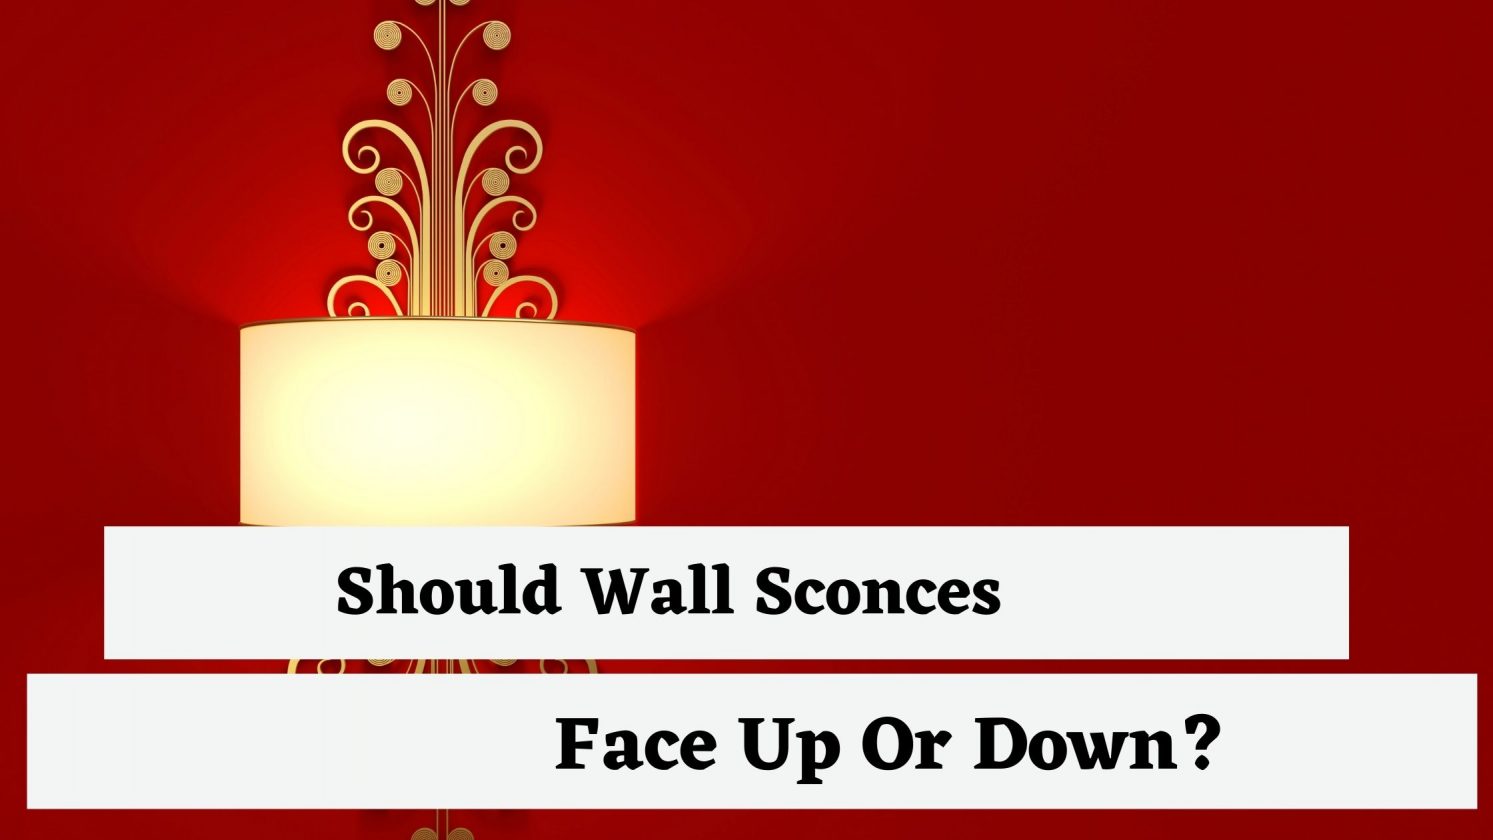 Should Wall Sconces Face Up Or Down?